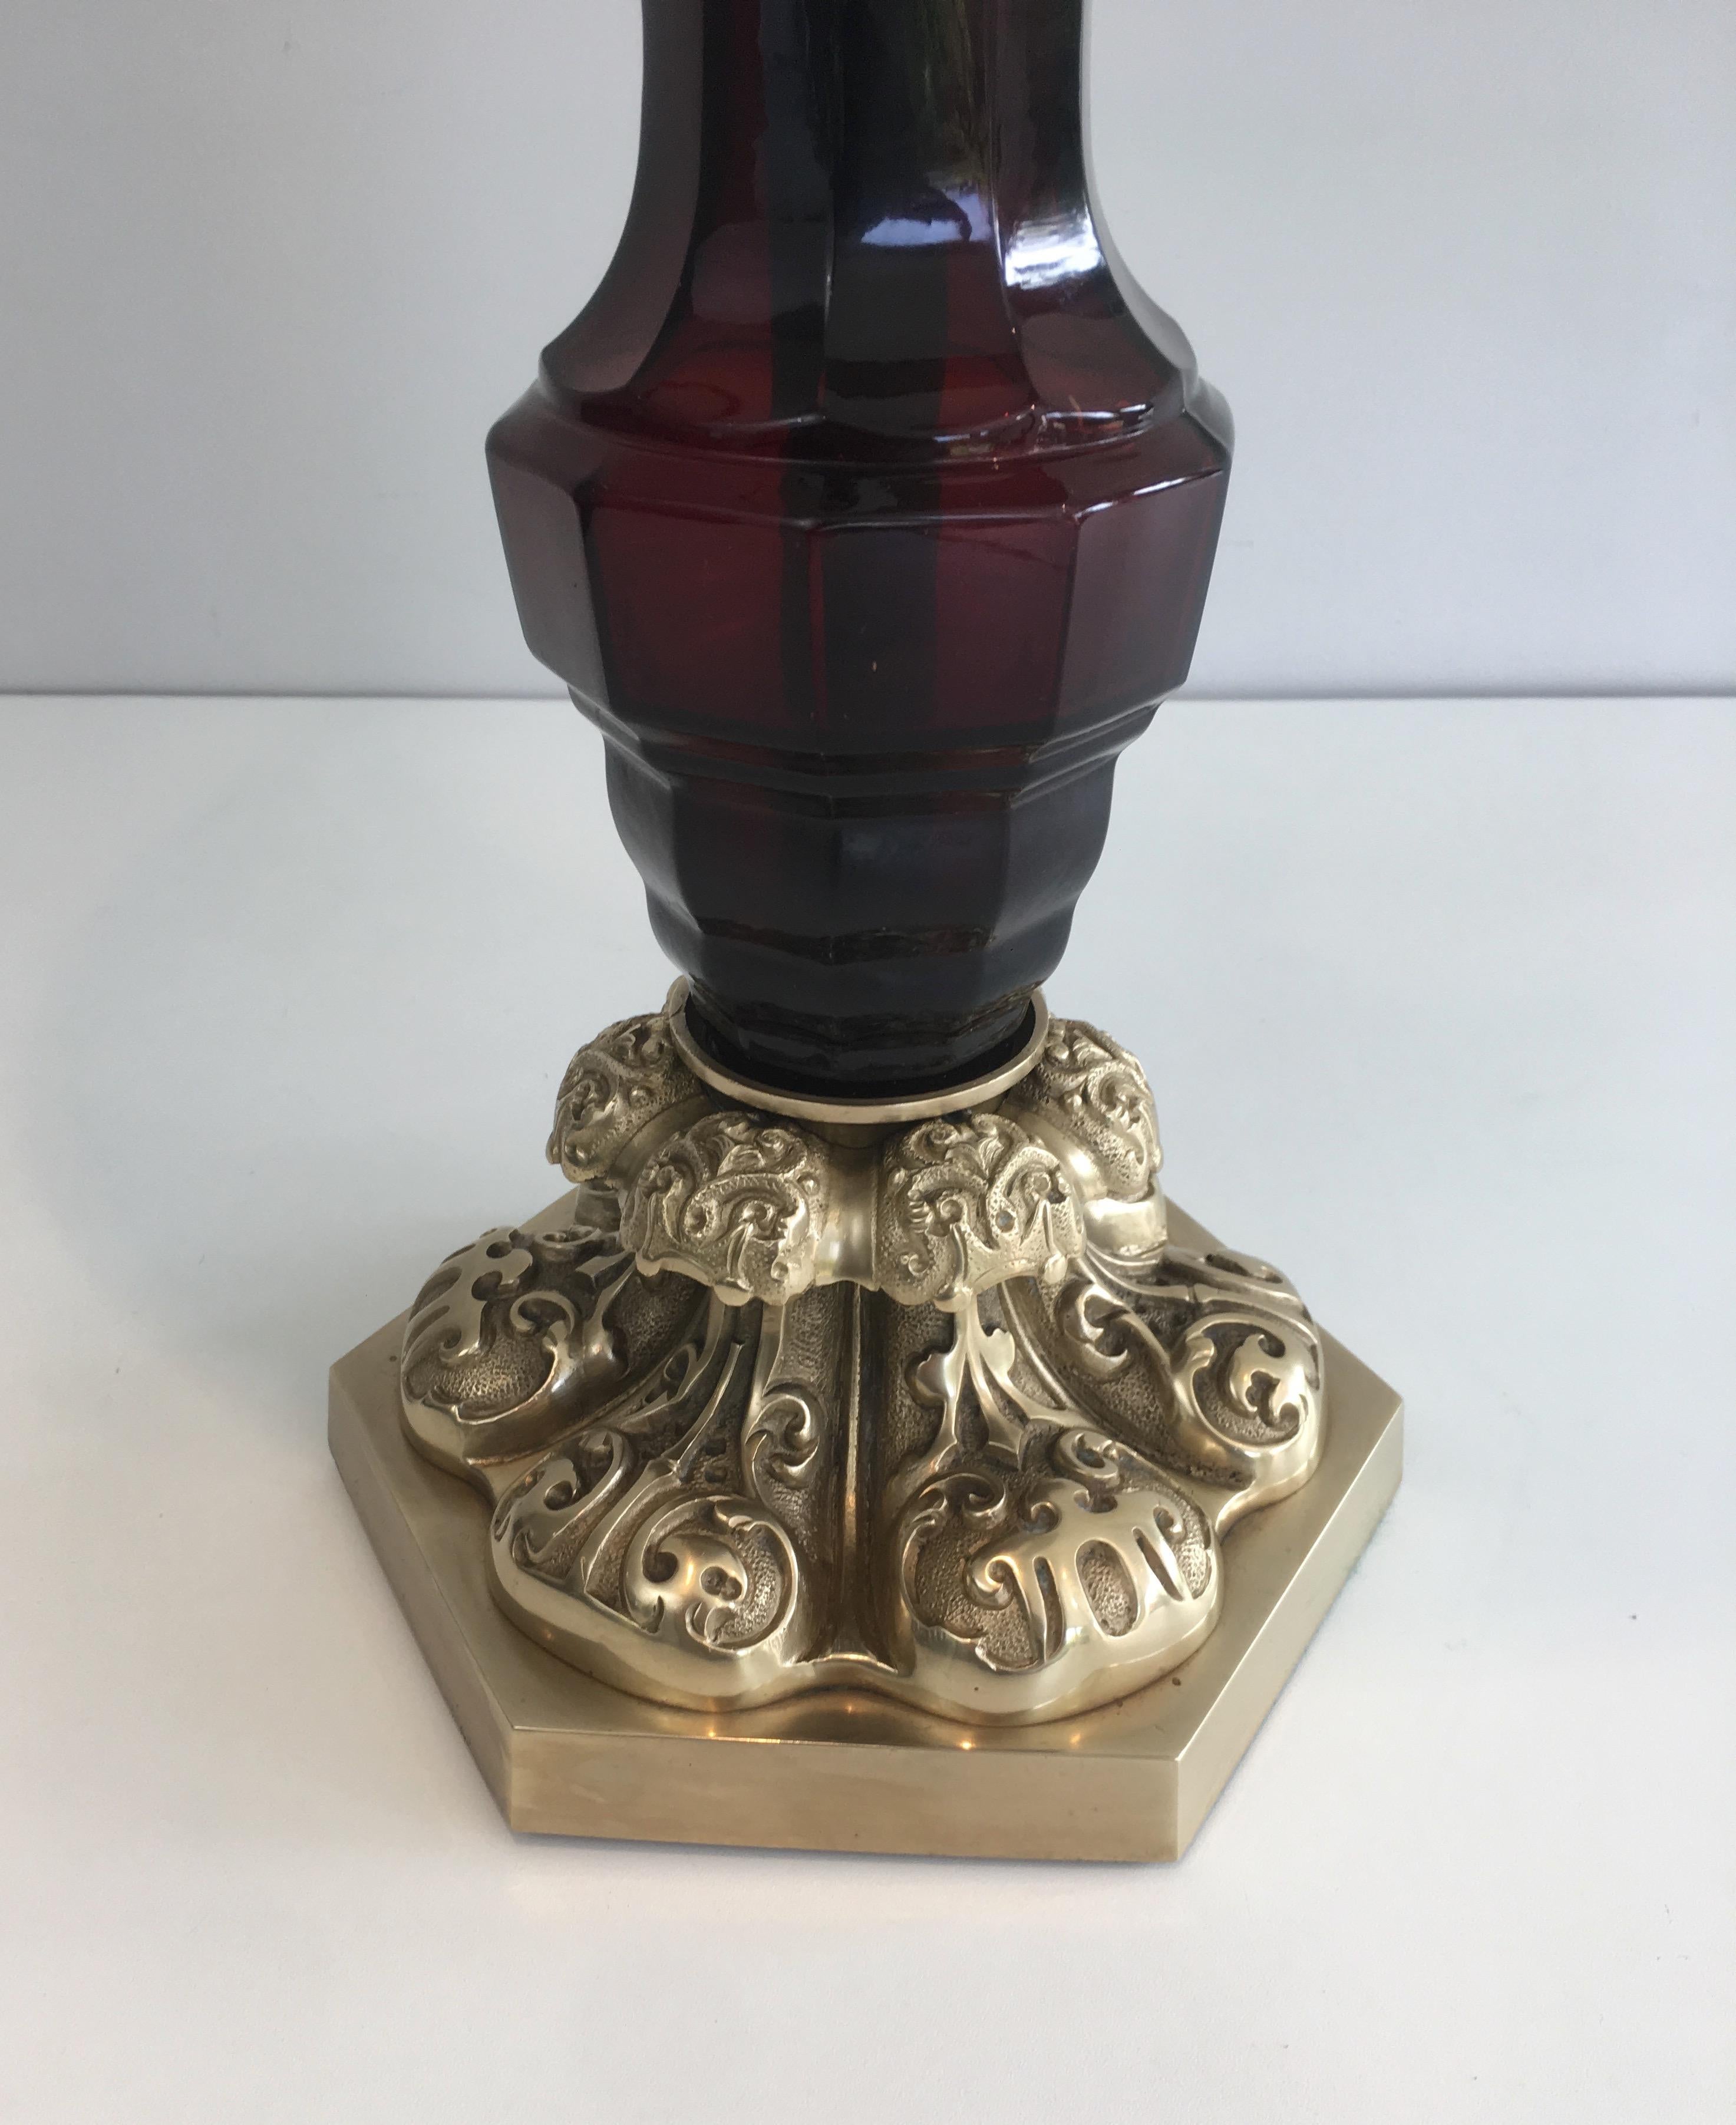 Attributed to Cristal & Bronze Paris, Tall Red Crystal and Chiseled Bronze Table In Good Condition For Sale In Marcq-en-Barœul, Hauts-de-France